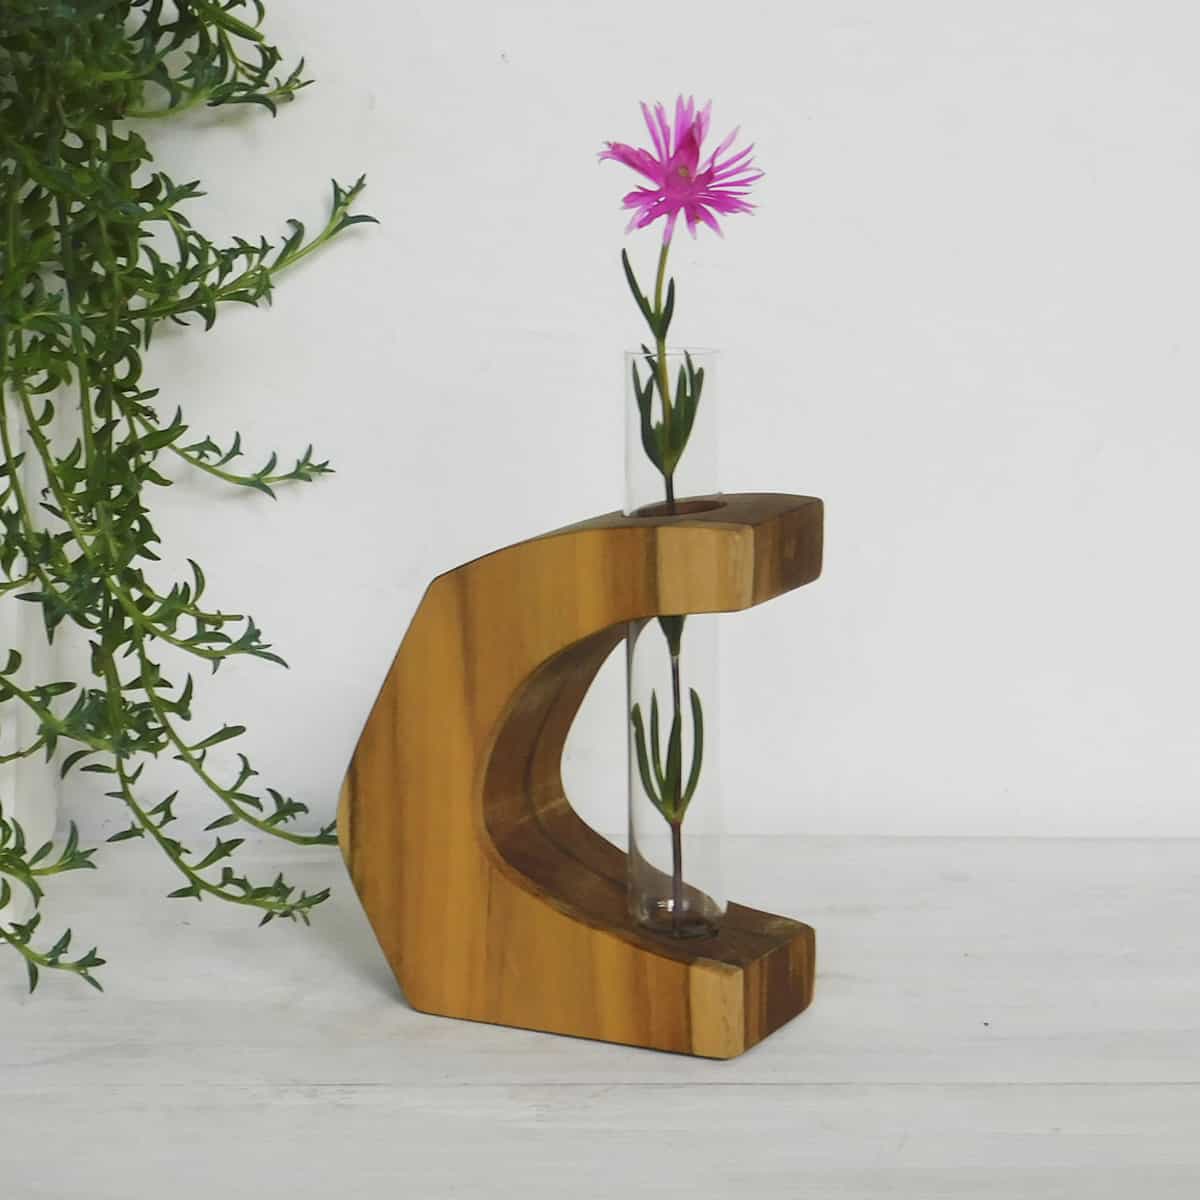 a flower test tubes in a teak frame shaped like a c displaying a pink flower against a white backdrop with a hanging plant